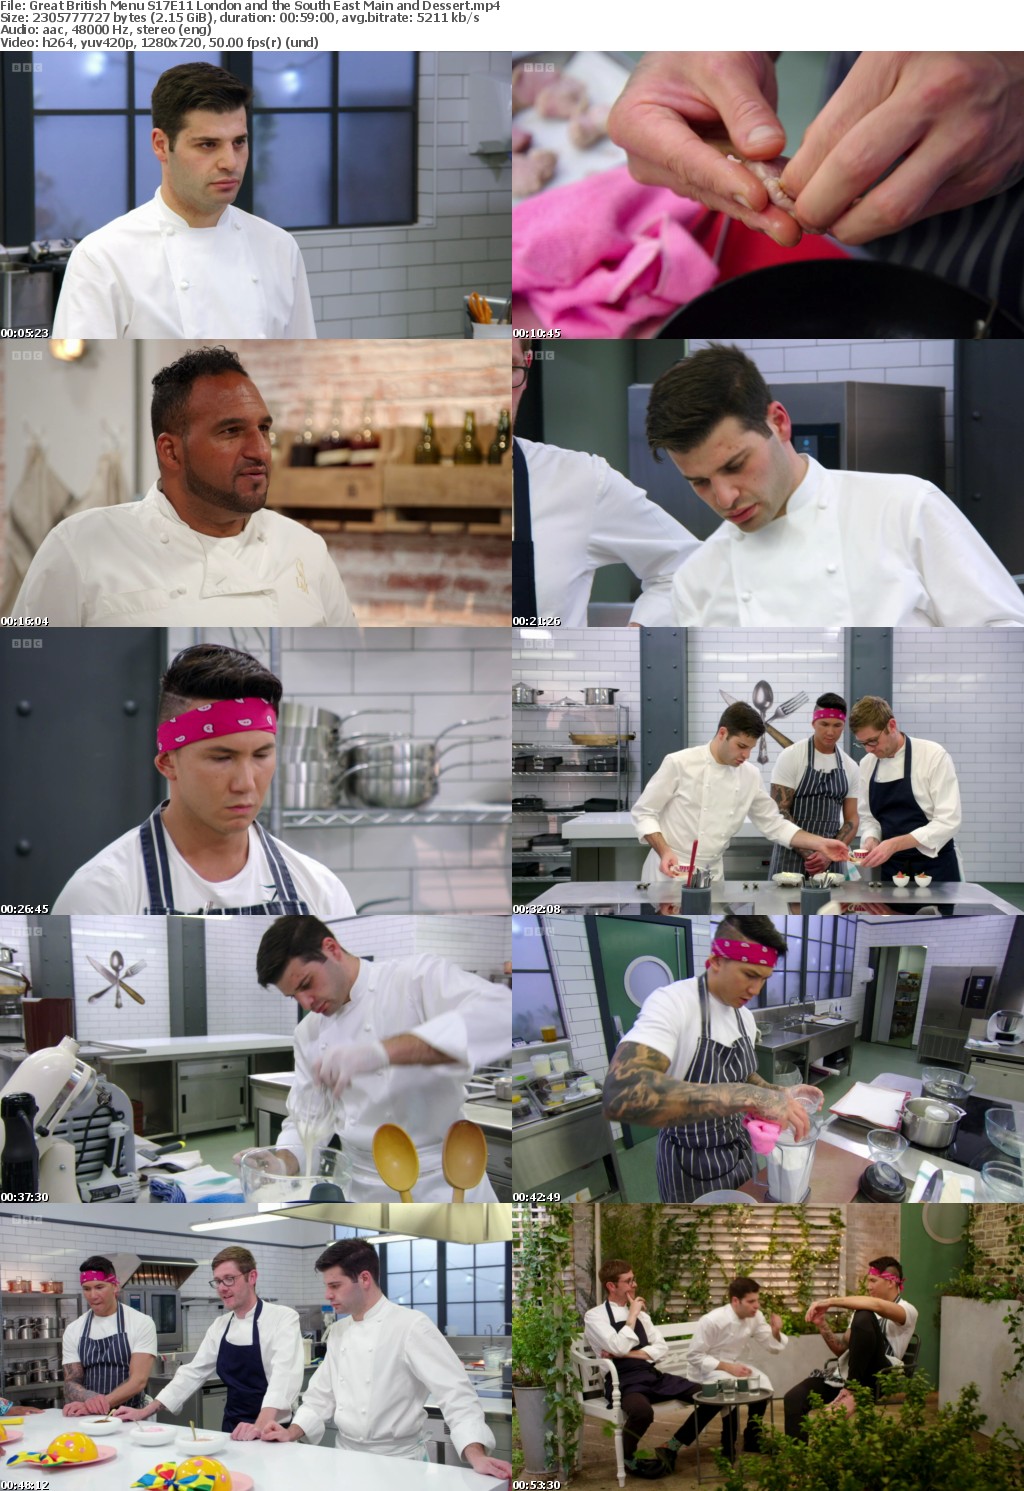 Great British Menu S17E11 London and the South East Main and Dessert (1280x720p HD, 50fps, soft Eng subs)